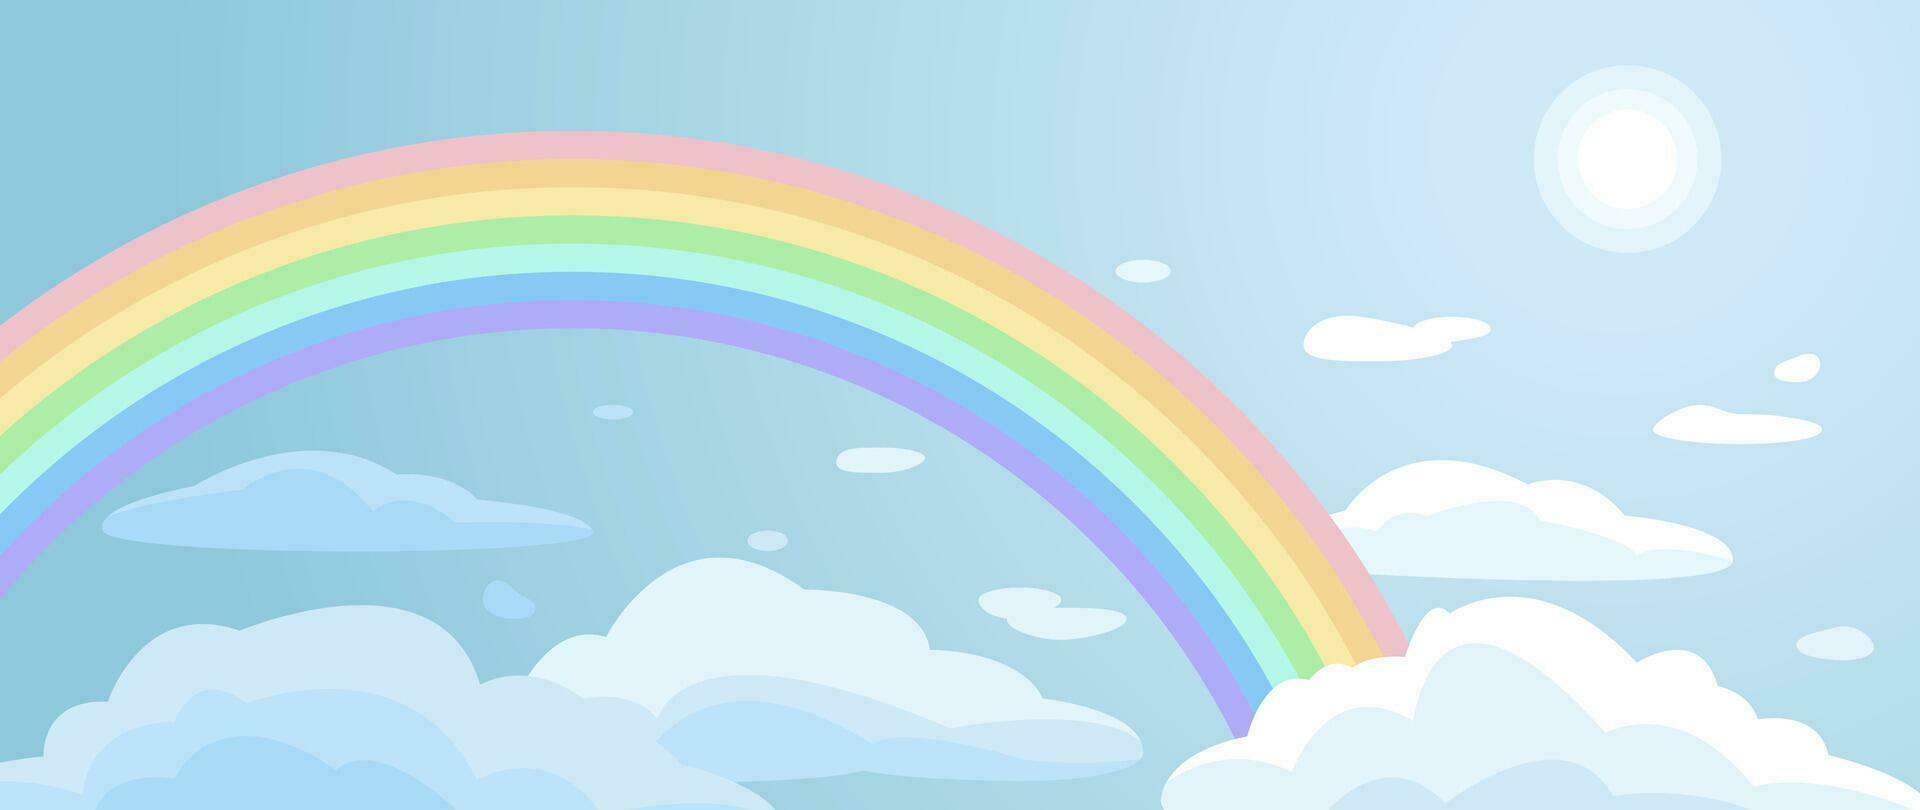 Blue sky background, with sun, clouds and rainbow. Vector illustration for cover, banner, poster, web and packaging.